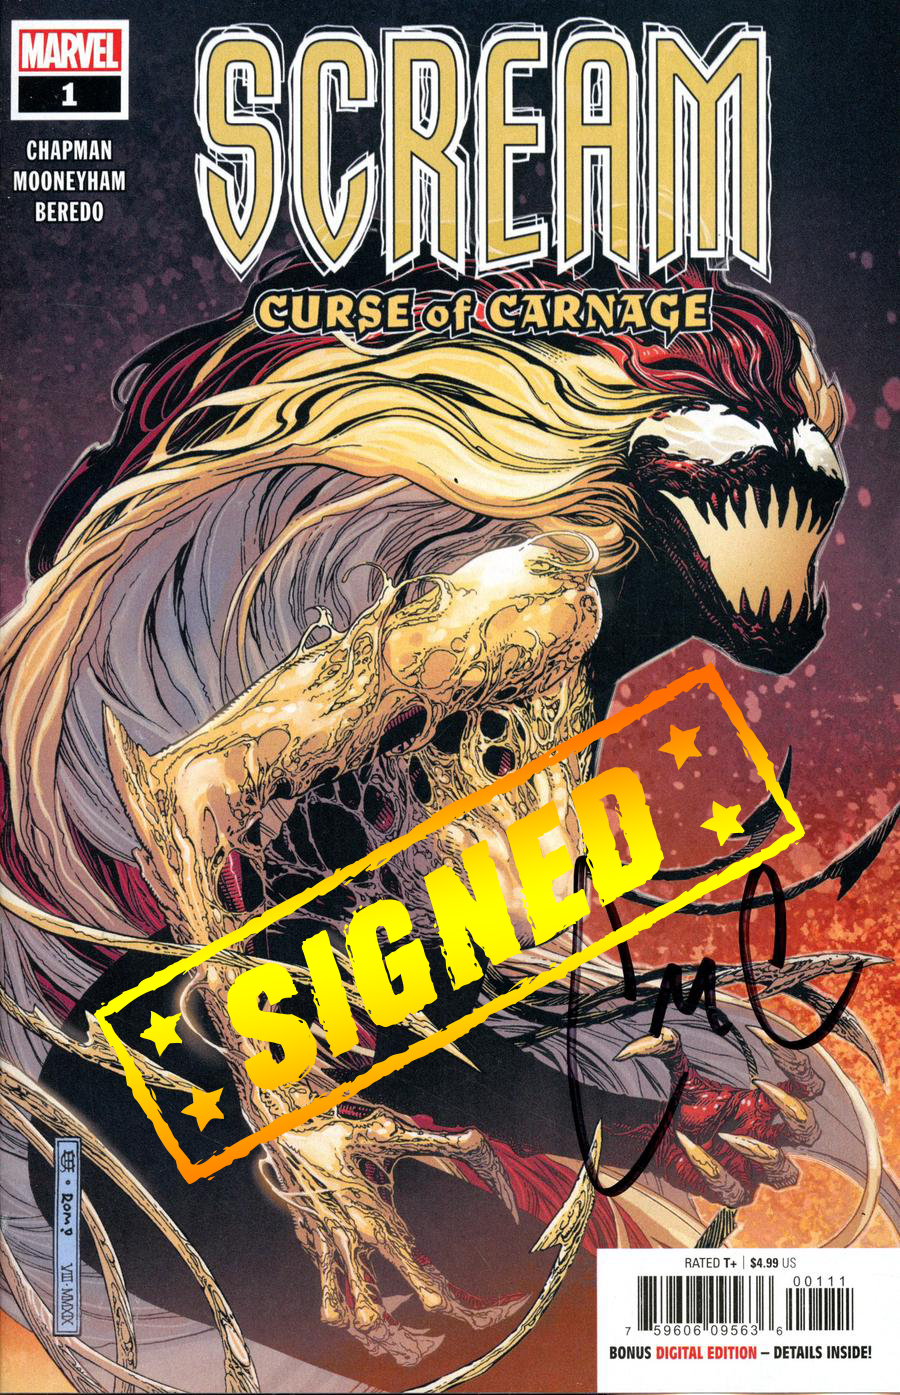 Scream Curse Of Carnage #1 Cover G Regular Jim Cheung Cover Signed By Clay McLeod Chapman (Absolute Carnage Tie-In)